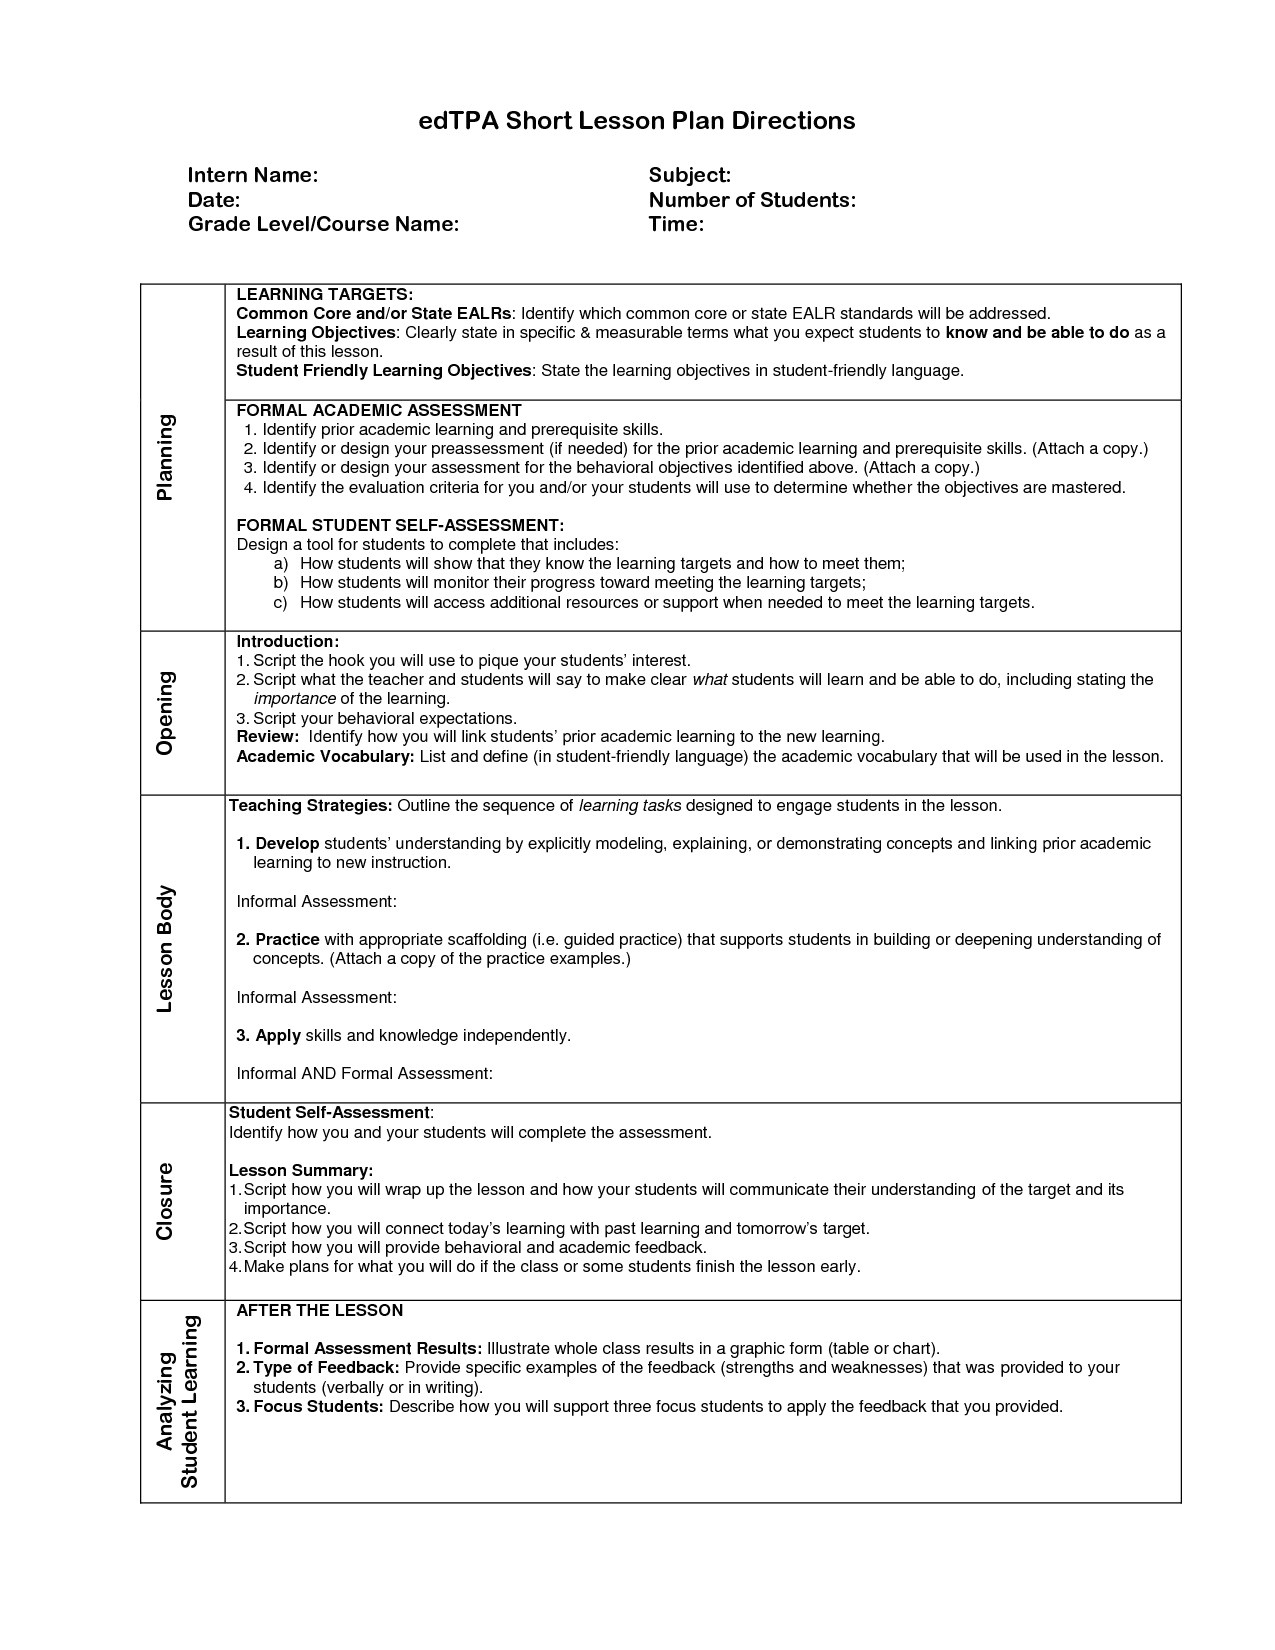 index of cdn 28 2006 853 inside new york state edtpa lesson plan template